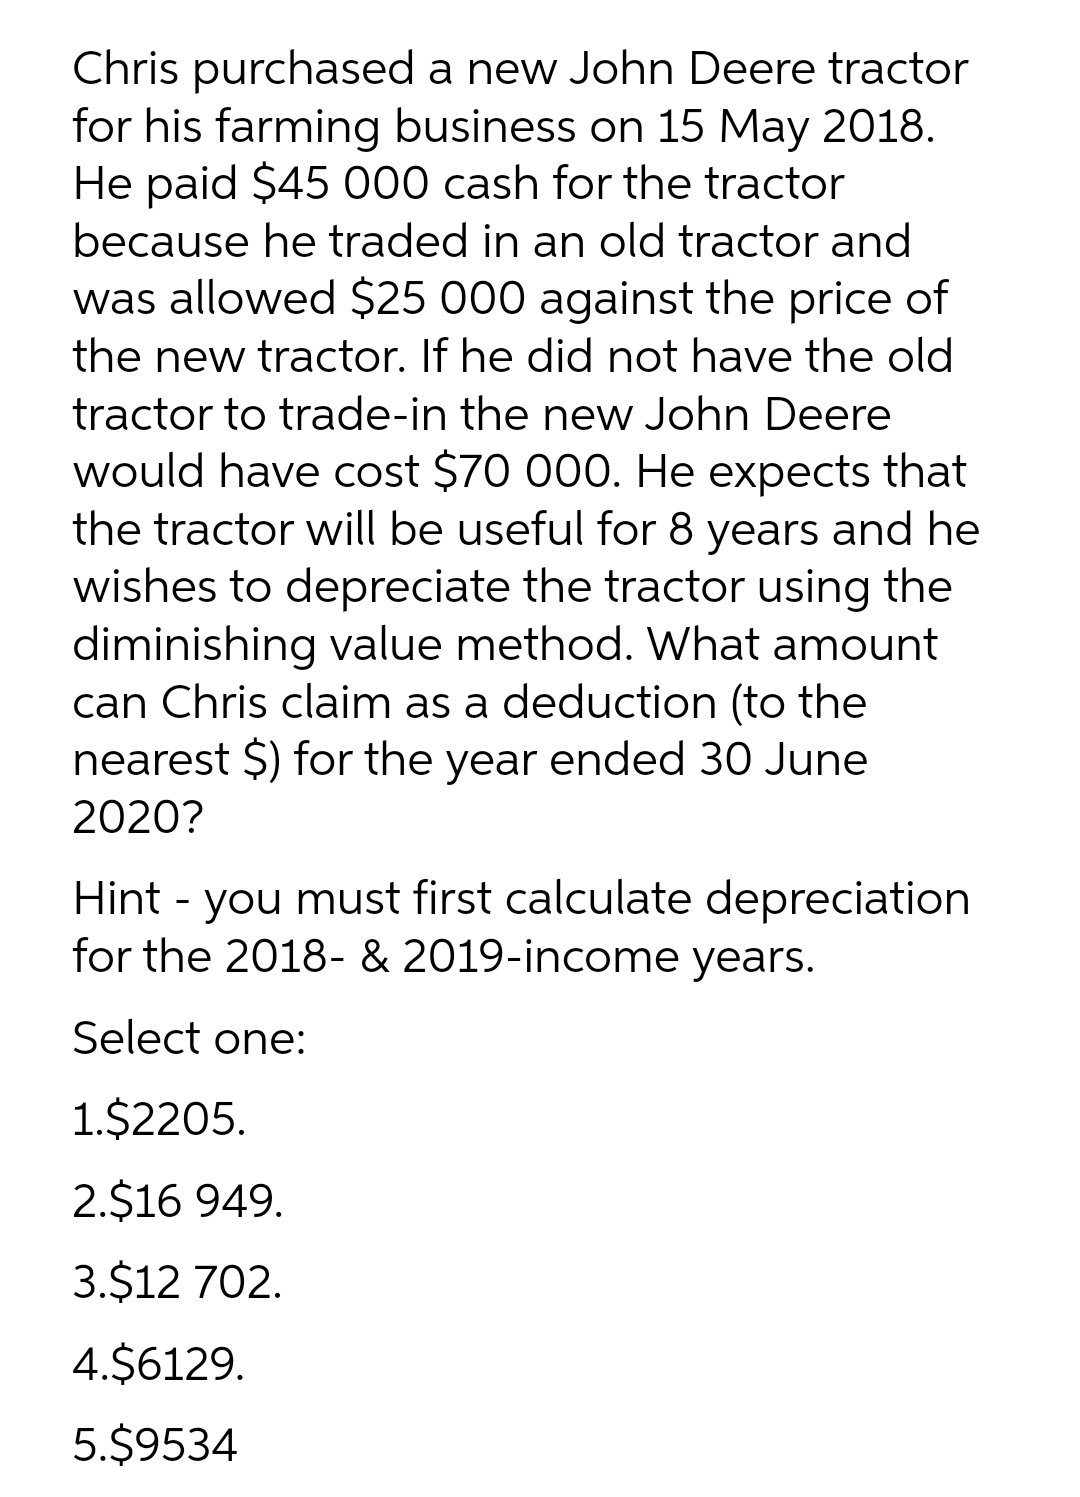 Chris purchased a new John Deere tractor
for his farming business on 15 May 2018.
He paid $45 000 cash for the tractor
because he traded in an old tractor and
was allowed $25 000 against the price of
the new tractor. If he did not have the old
tractor to trade-in the new John Deere
would have cost $70 000. He expects that
the tractor will be useful for 8 years and he
wishes to depreciate the tractor using the
diminishing value method. What amount
can Chris claim as a deduction (to the
nearest $) for the year ended 30 June
2020?
Hint - you must first calculate depreciation
for the 2018- & 2019-income years.
Select one:
1.$2205.
2.$16 949.
3.$12 702.
4.$6129.
5.$9534
